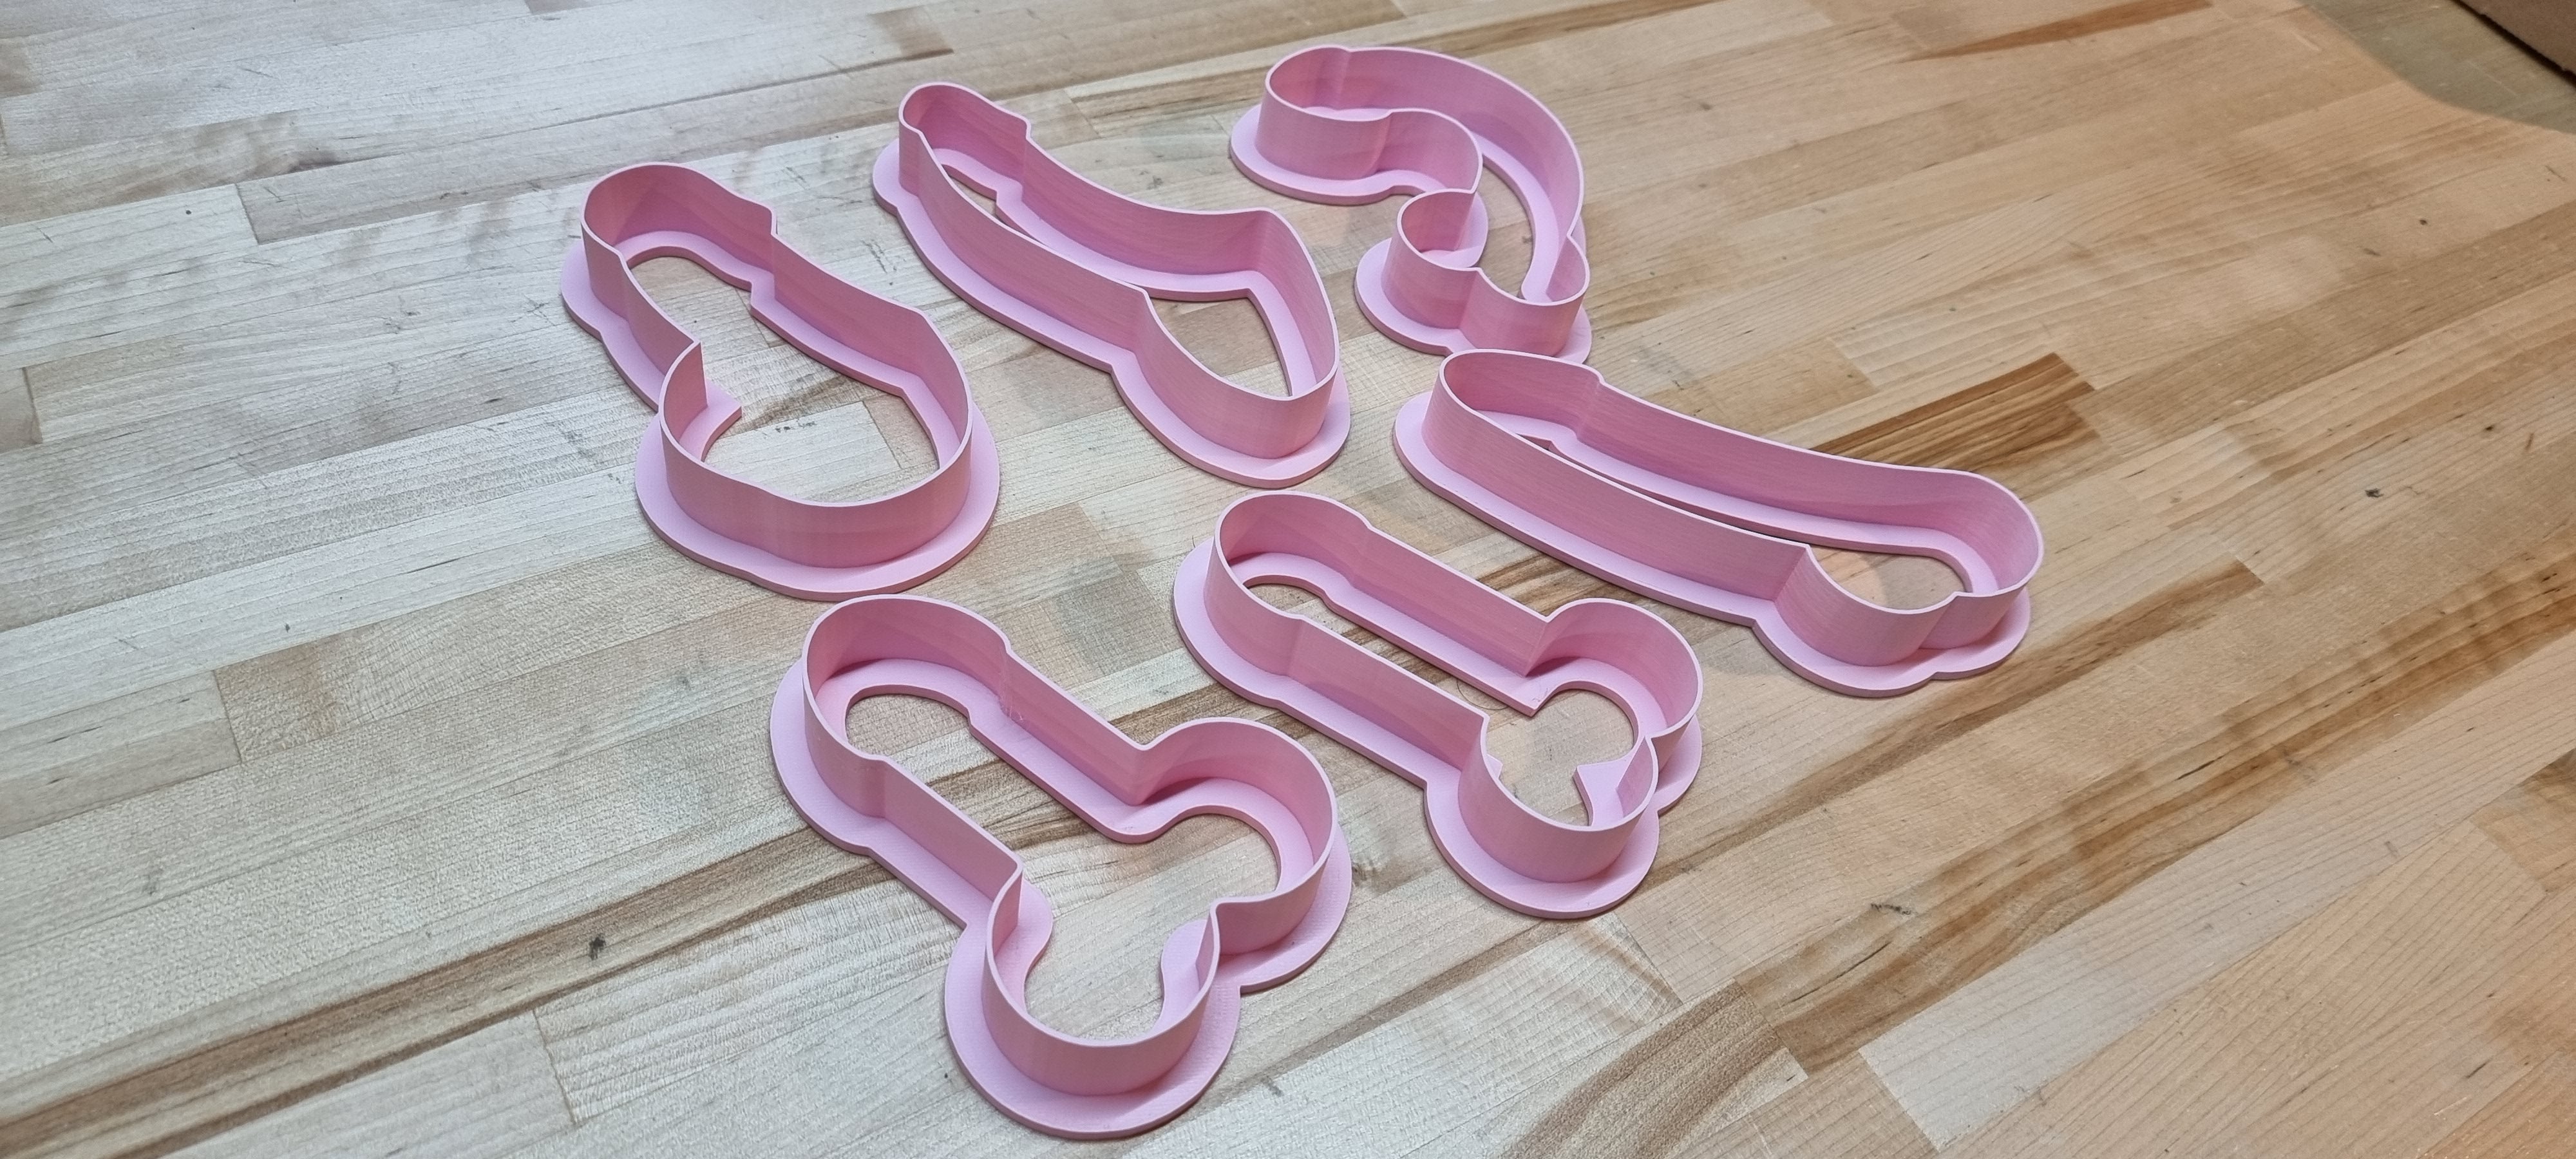 Basketball Sneaker Cookie Cutter - Etsy